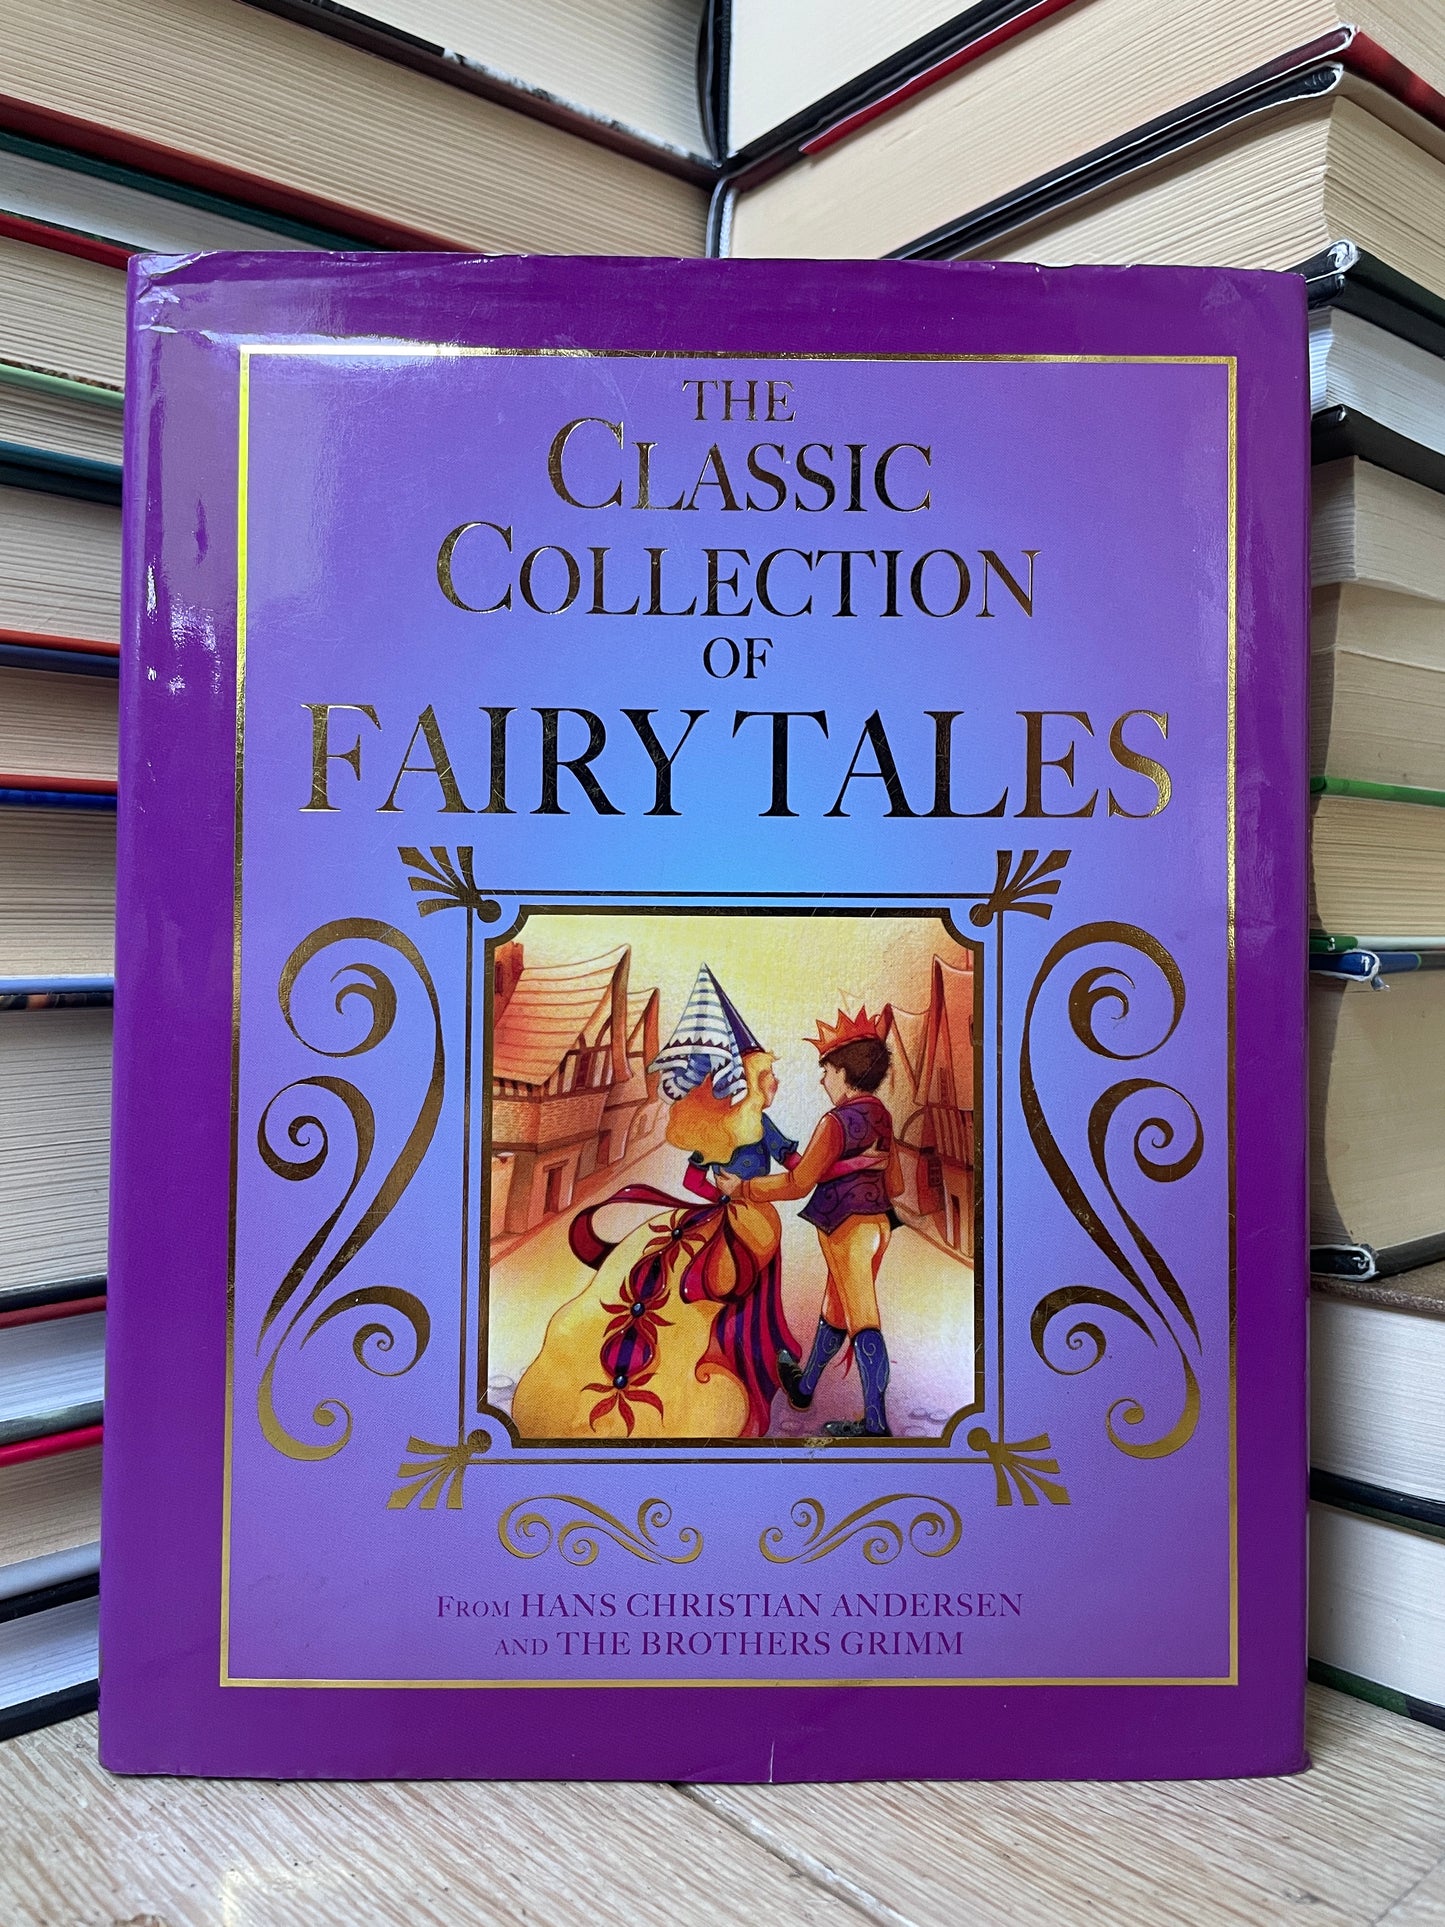 Hans Christian Andersen, The Brother Grimm - The Classic Collection of Fairy Tales